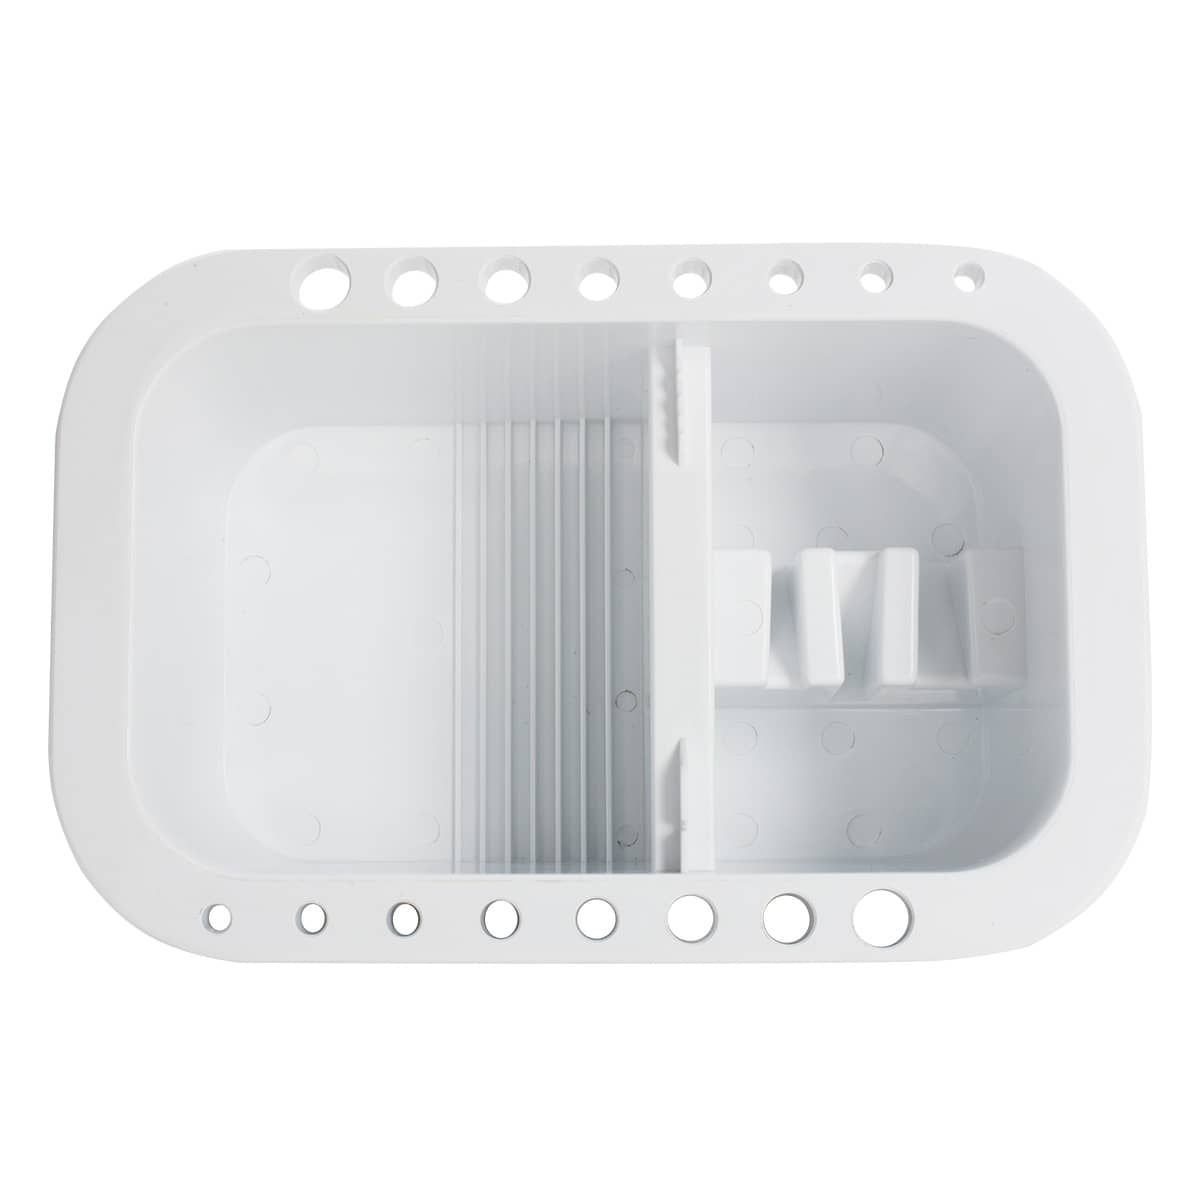 Jerry's Brush Washer and Basin has 3 water compartments 